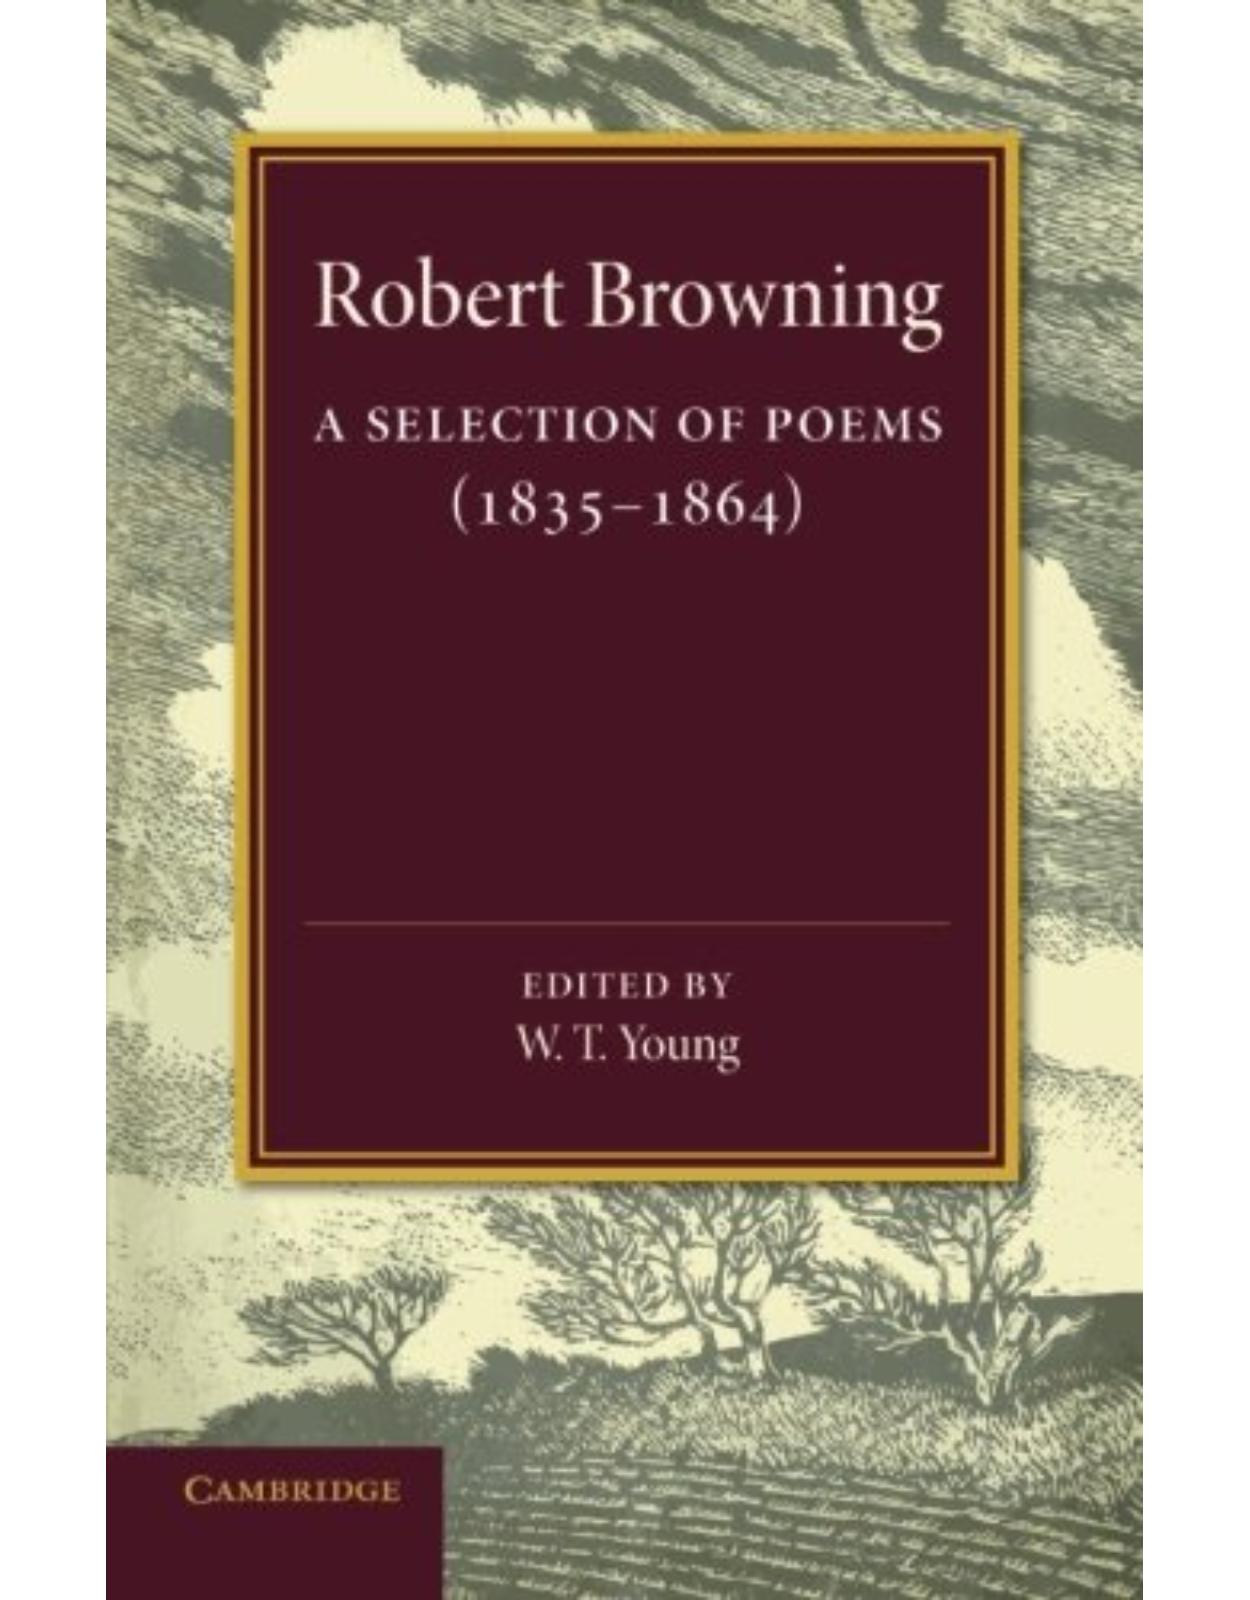 A Selection of Poems: 1835-1864